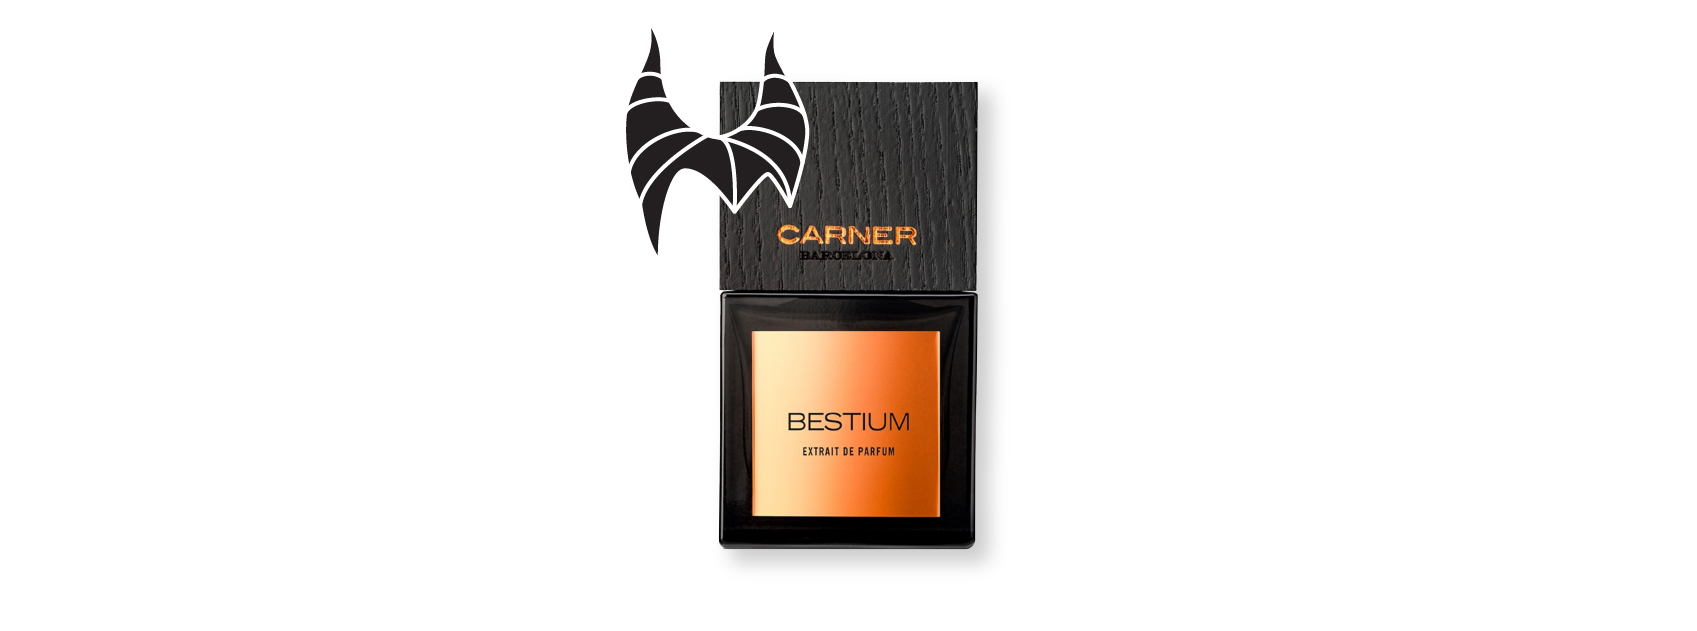 bottle of bestium by carner barcelona with illustration of maleficent's headgear